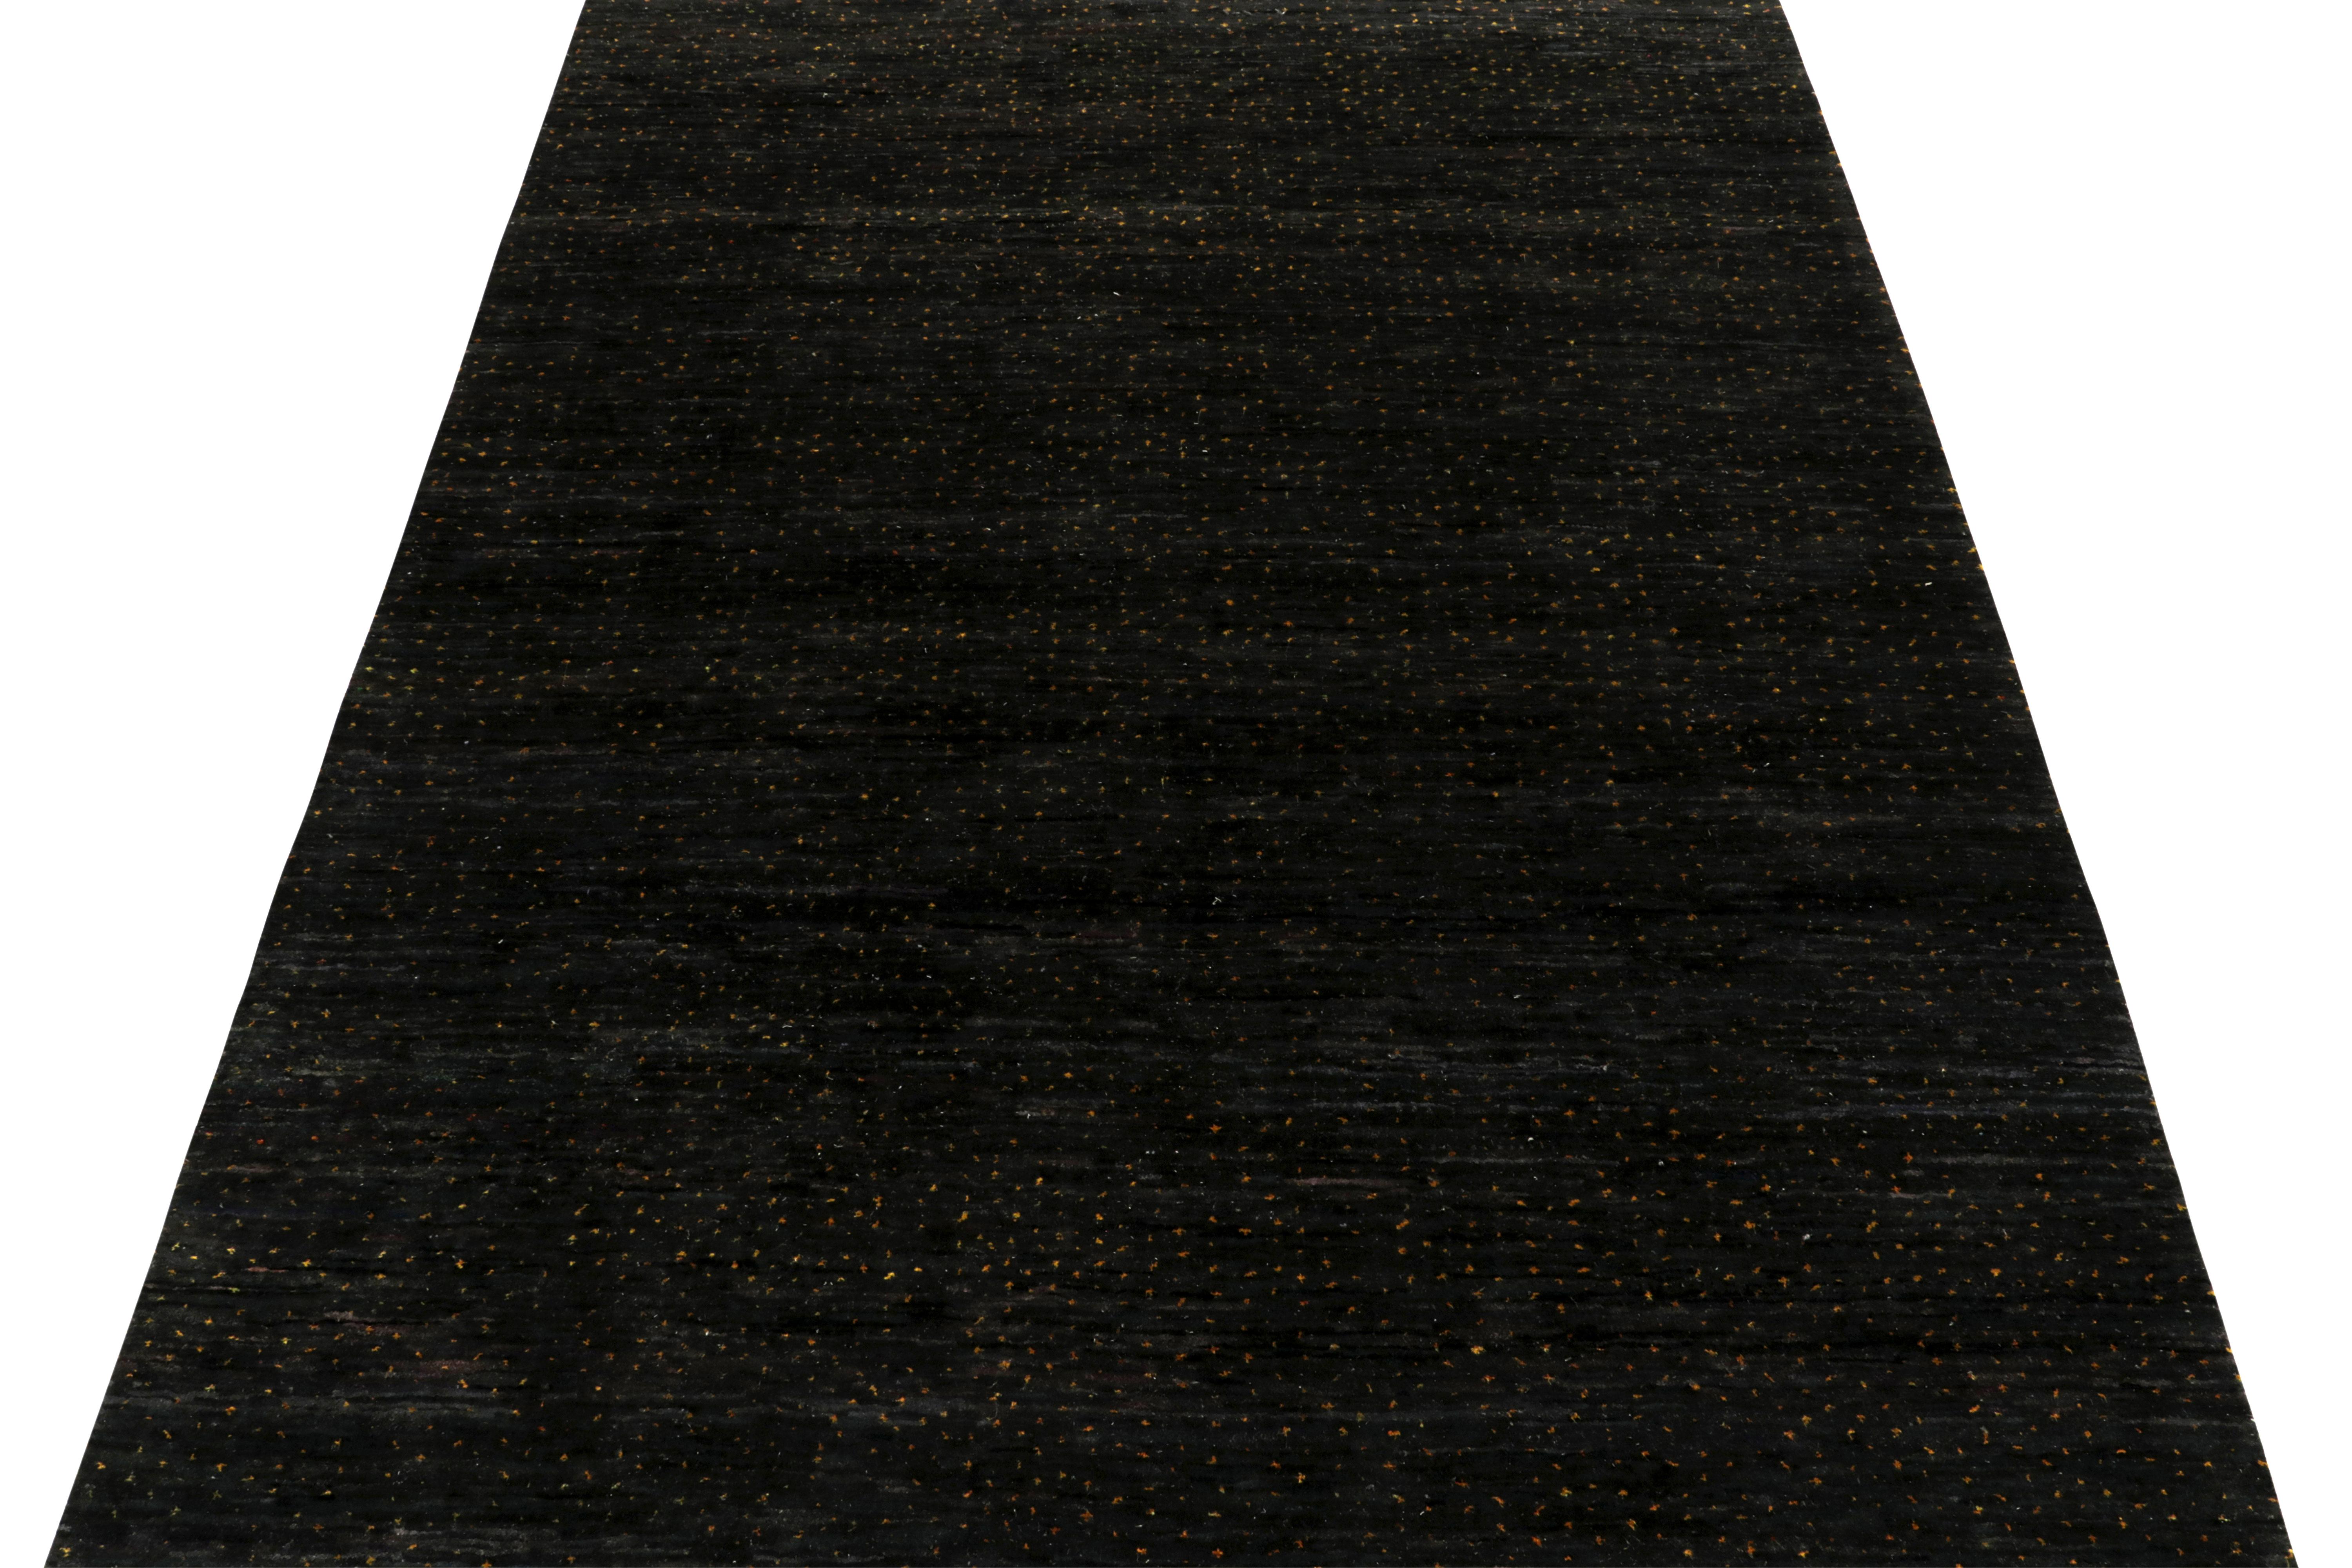 Hand-Knotted Rug & Kilim’s Contemporary Rug in Black with Gold Dots Pattern For Sale